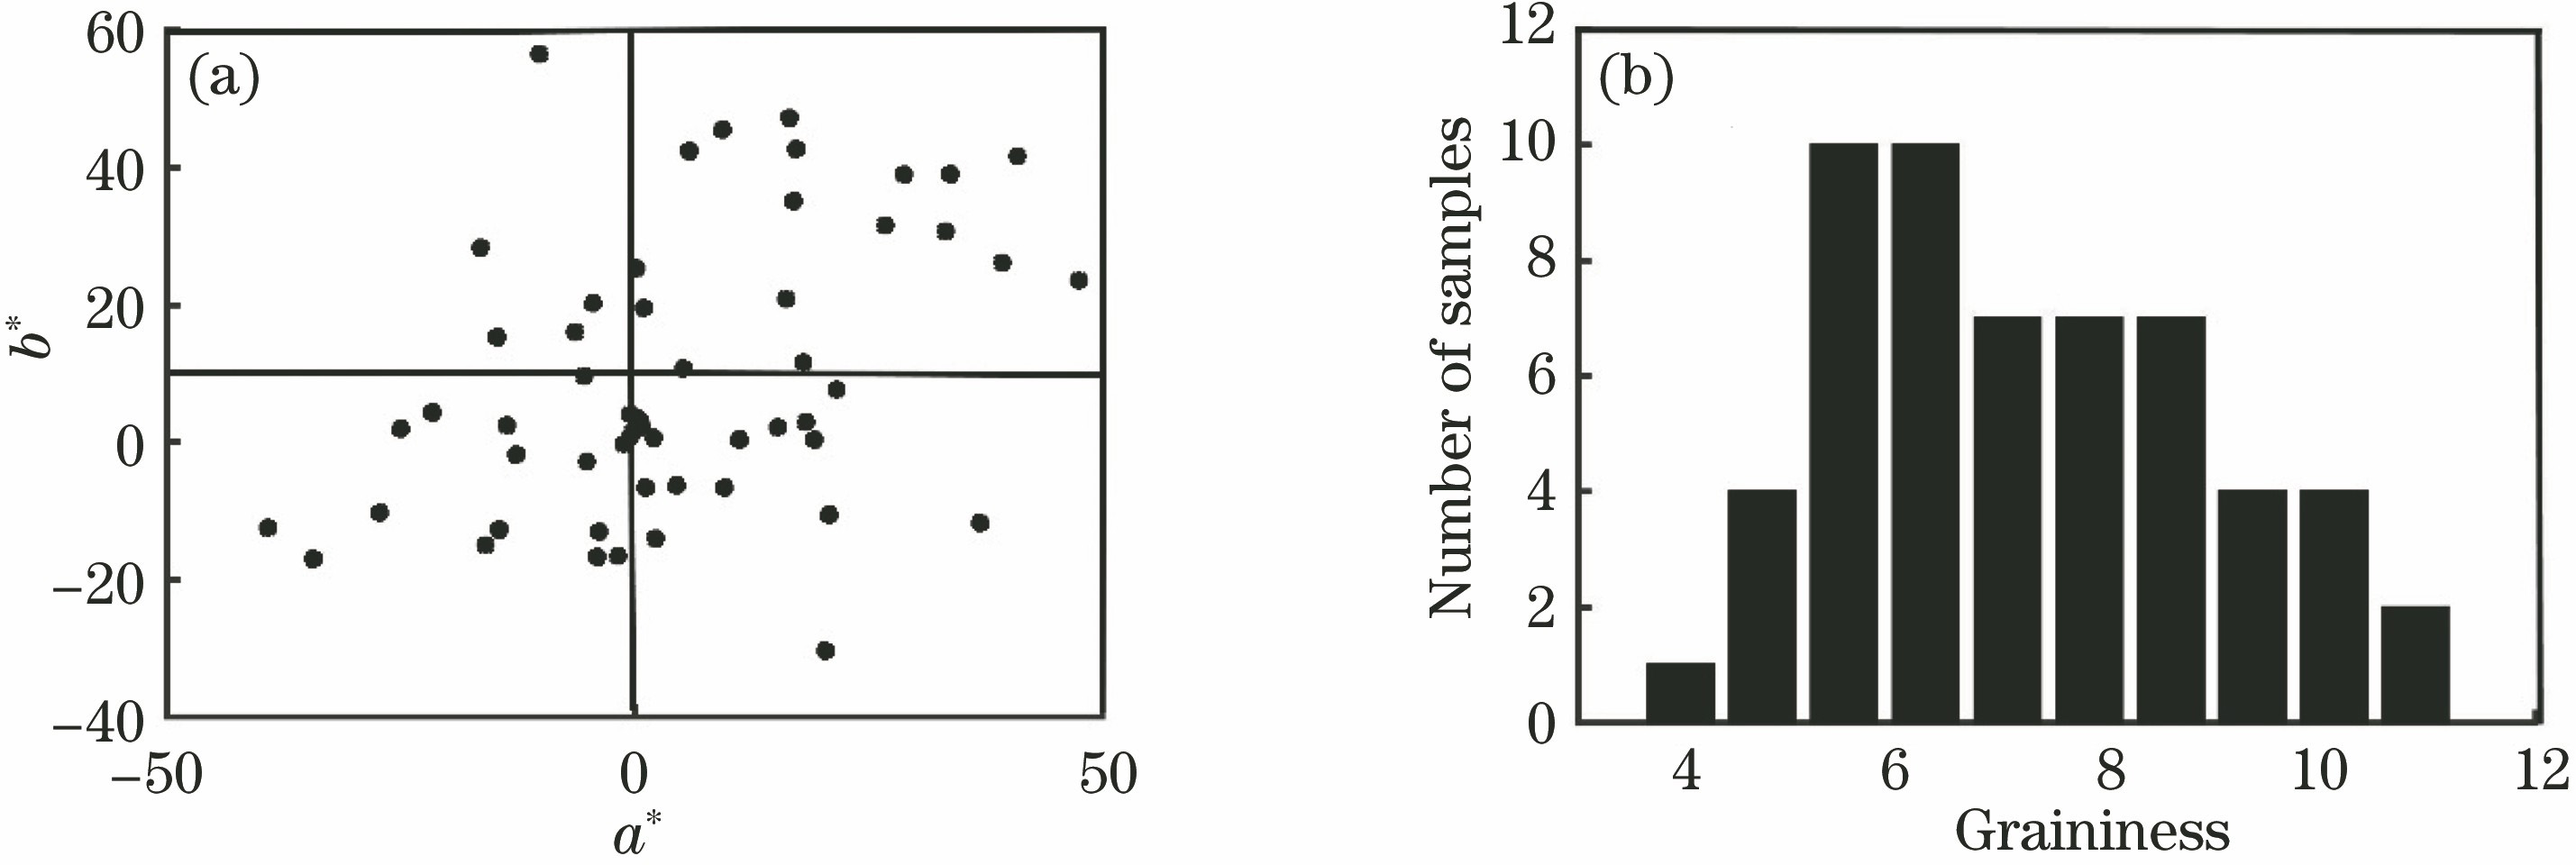 Distribution of sample parameters. (a) Color distribution of samples; (b) graininess distribution of samples